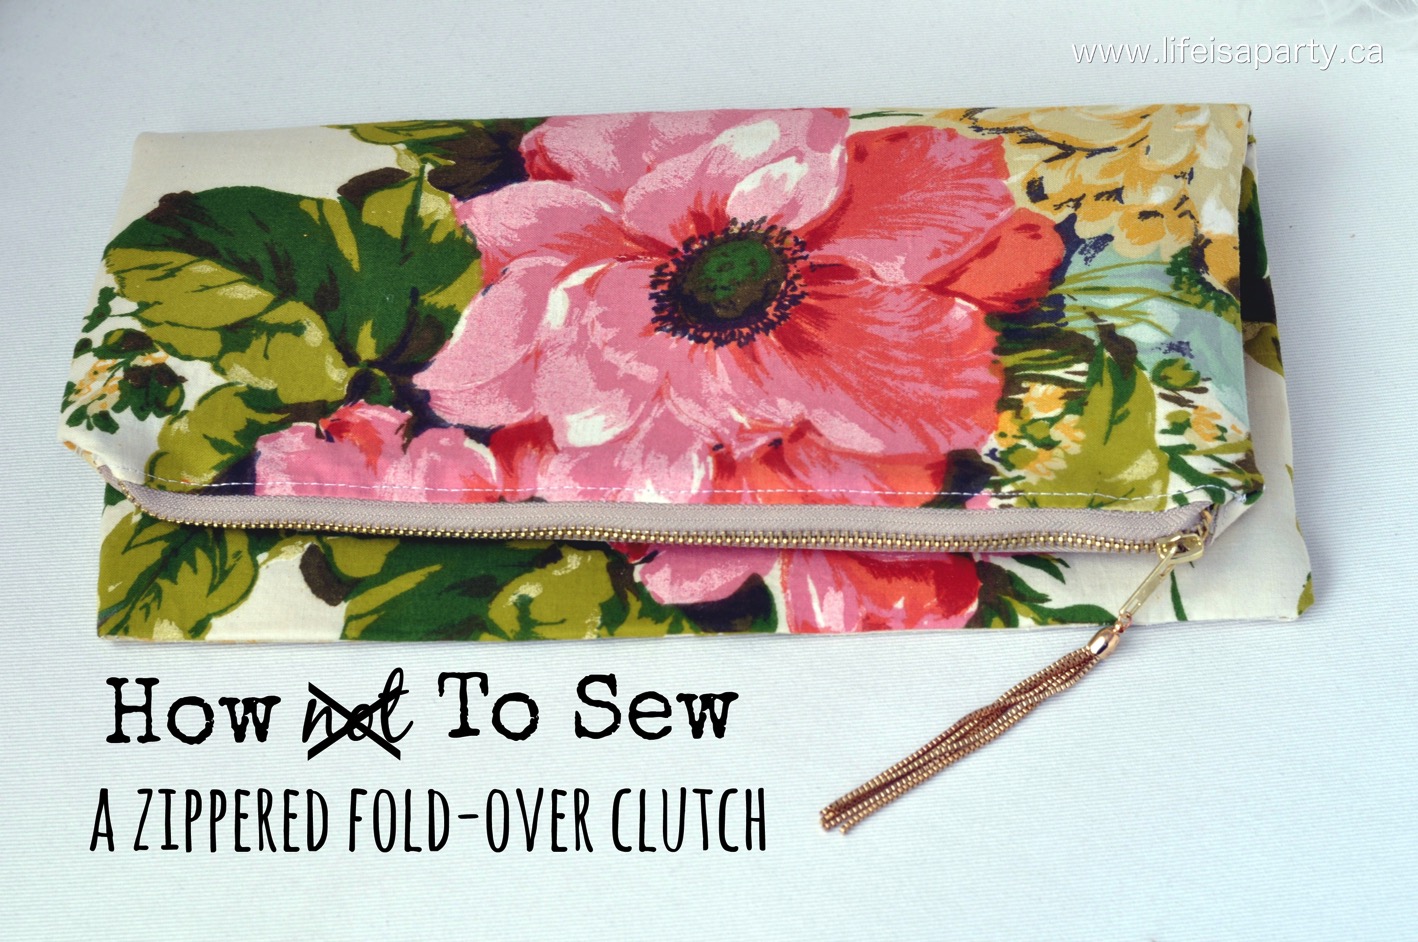 How NOT to Sew a Zippered Fold-over Clutch